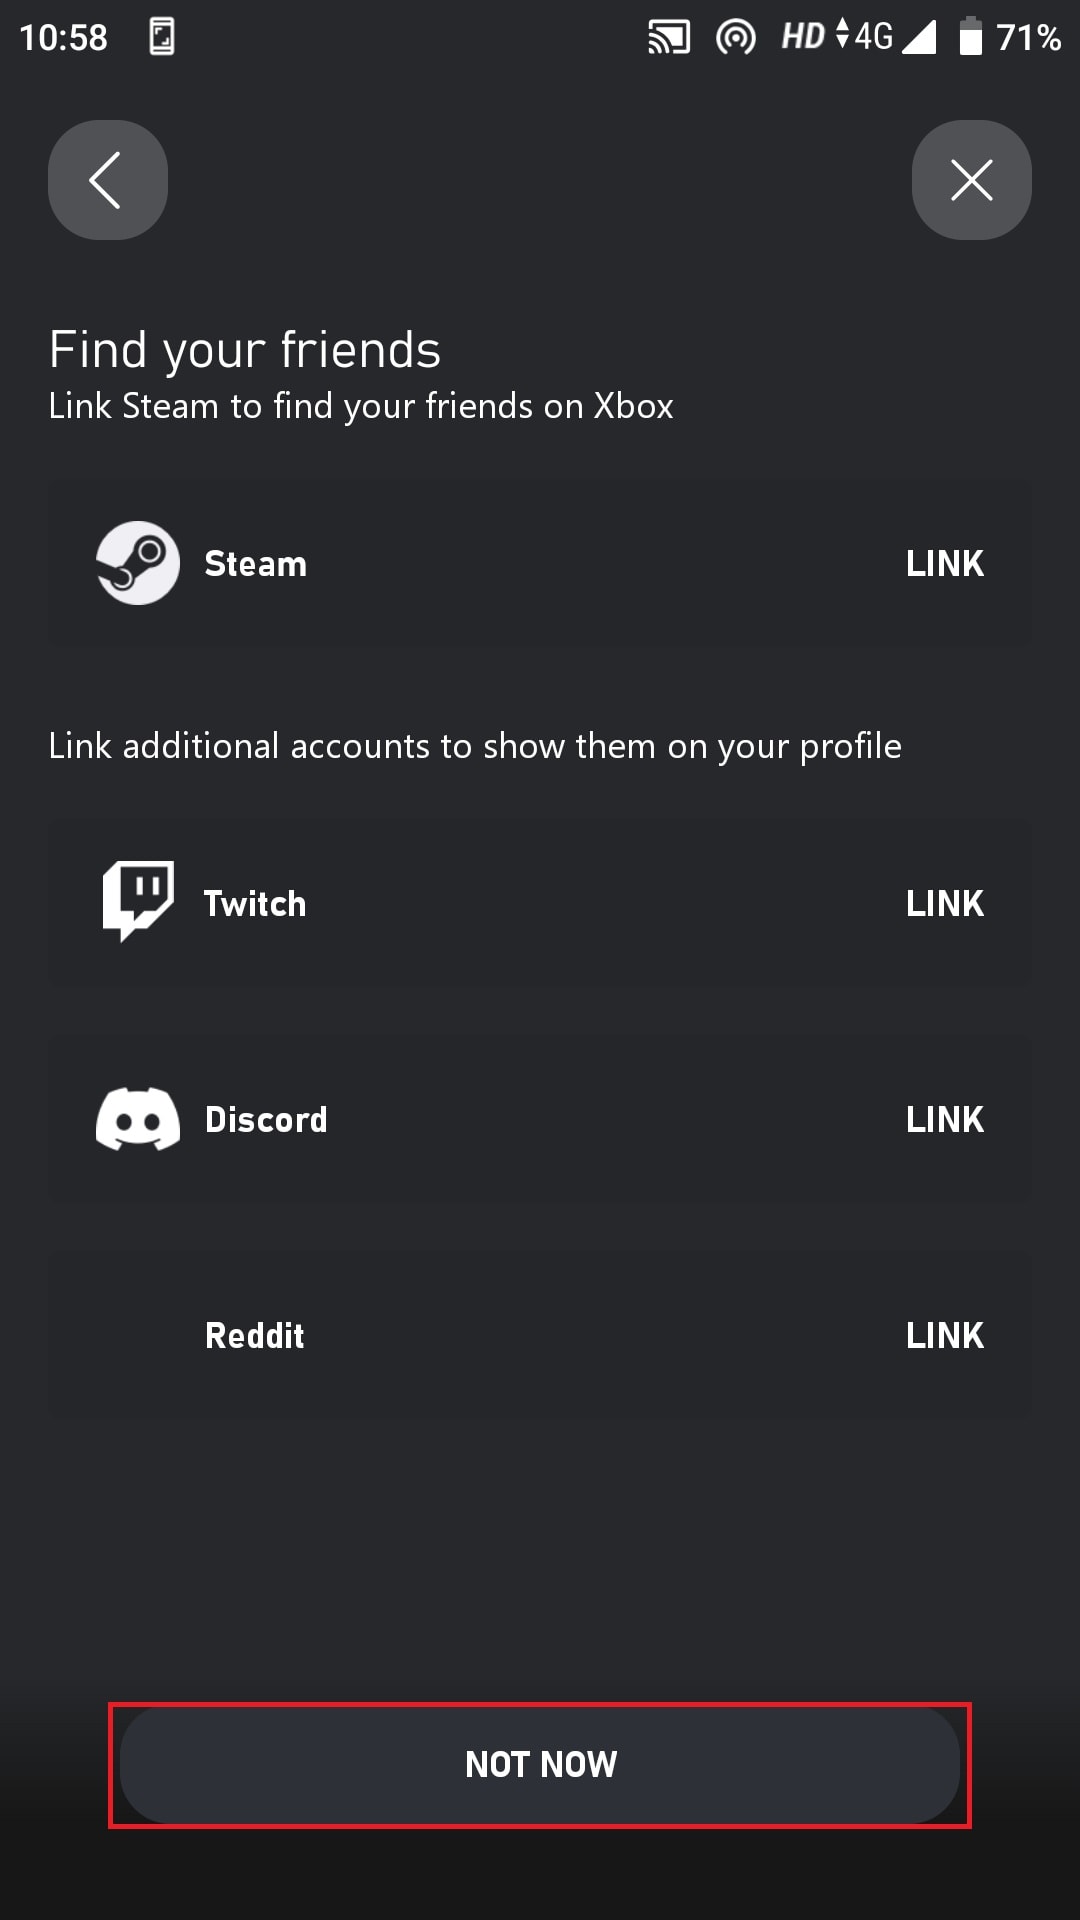 You can also link your Steam, Twitch, Discord, and Reddit Account or just simply tap on NOT NOW.